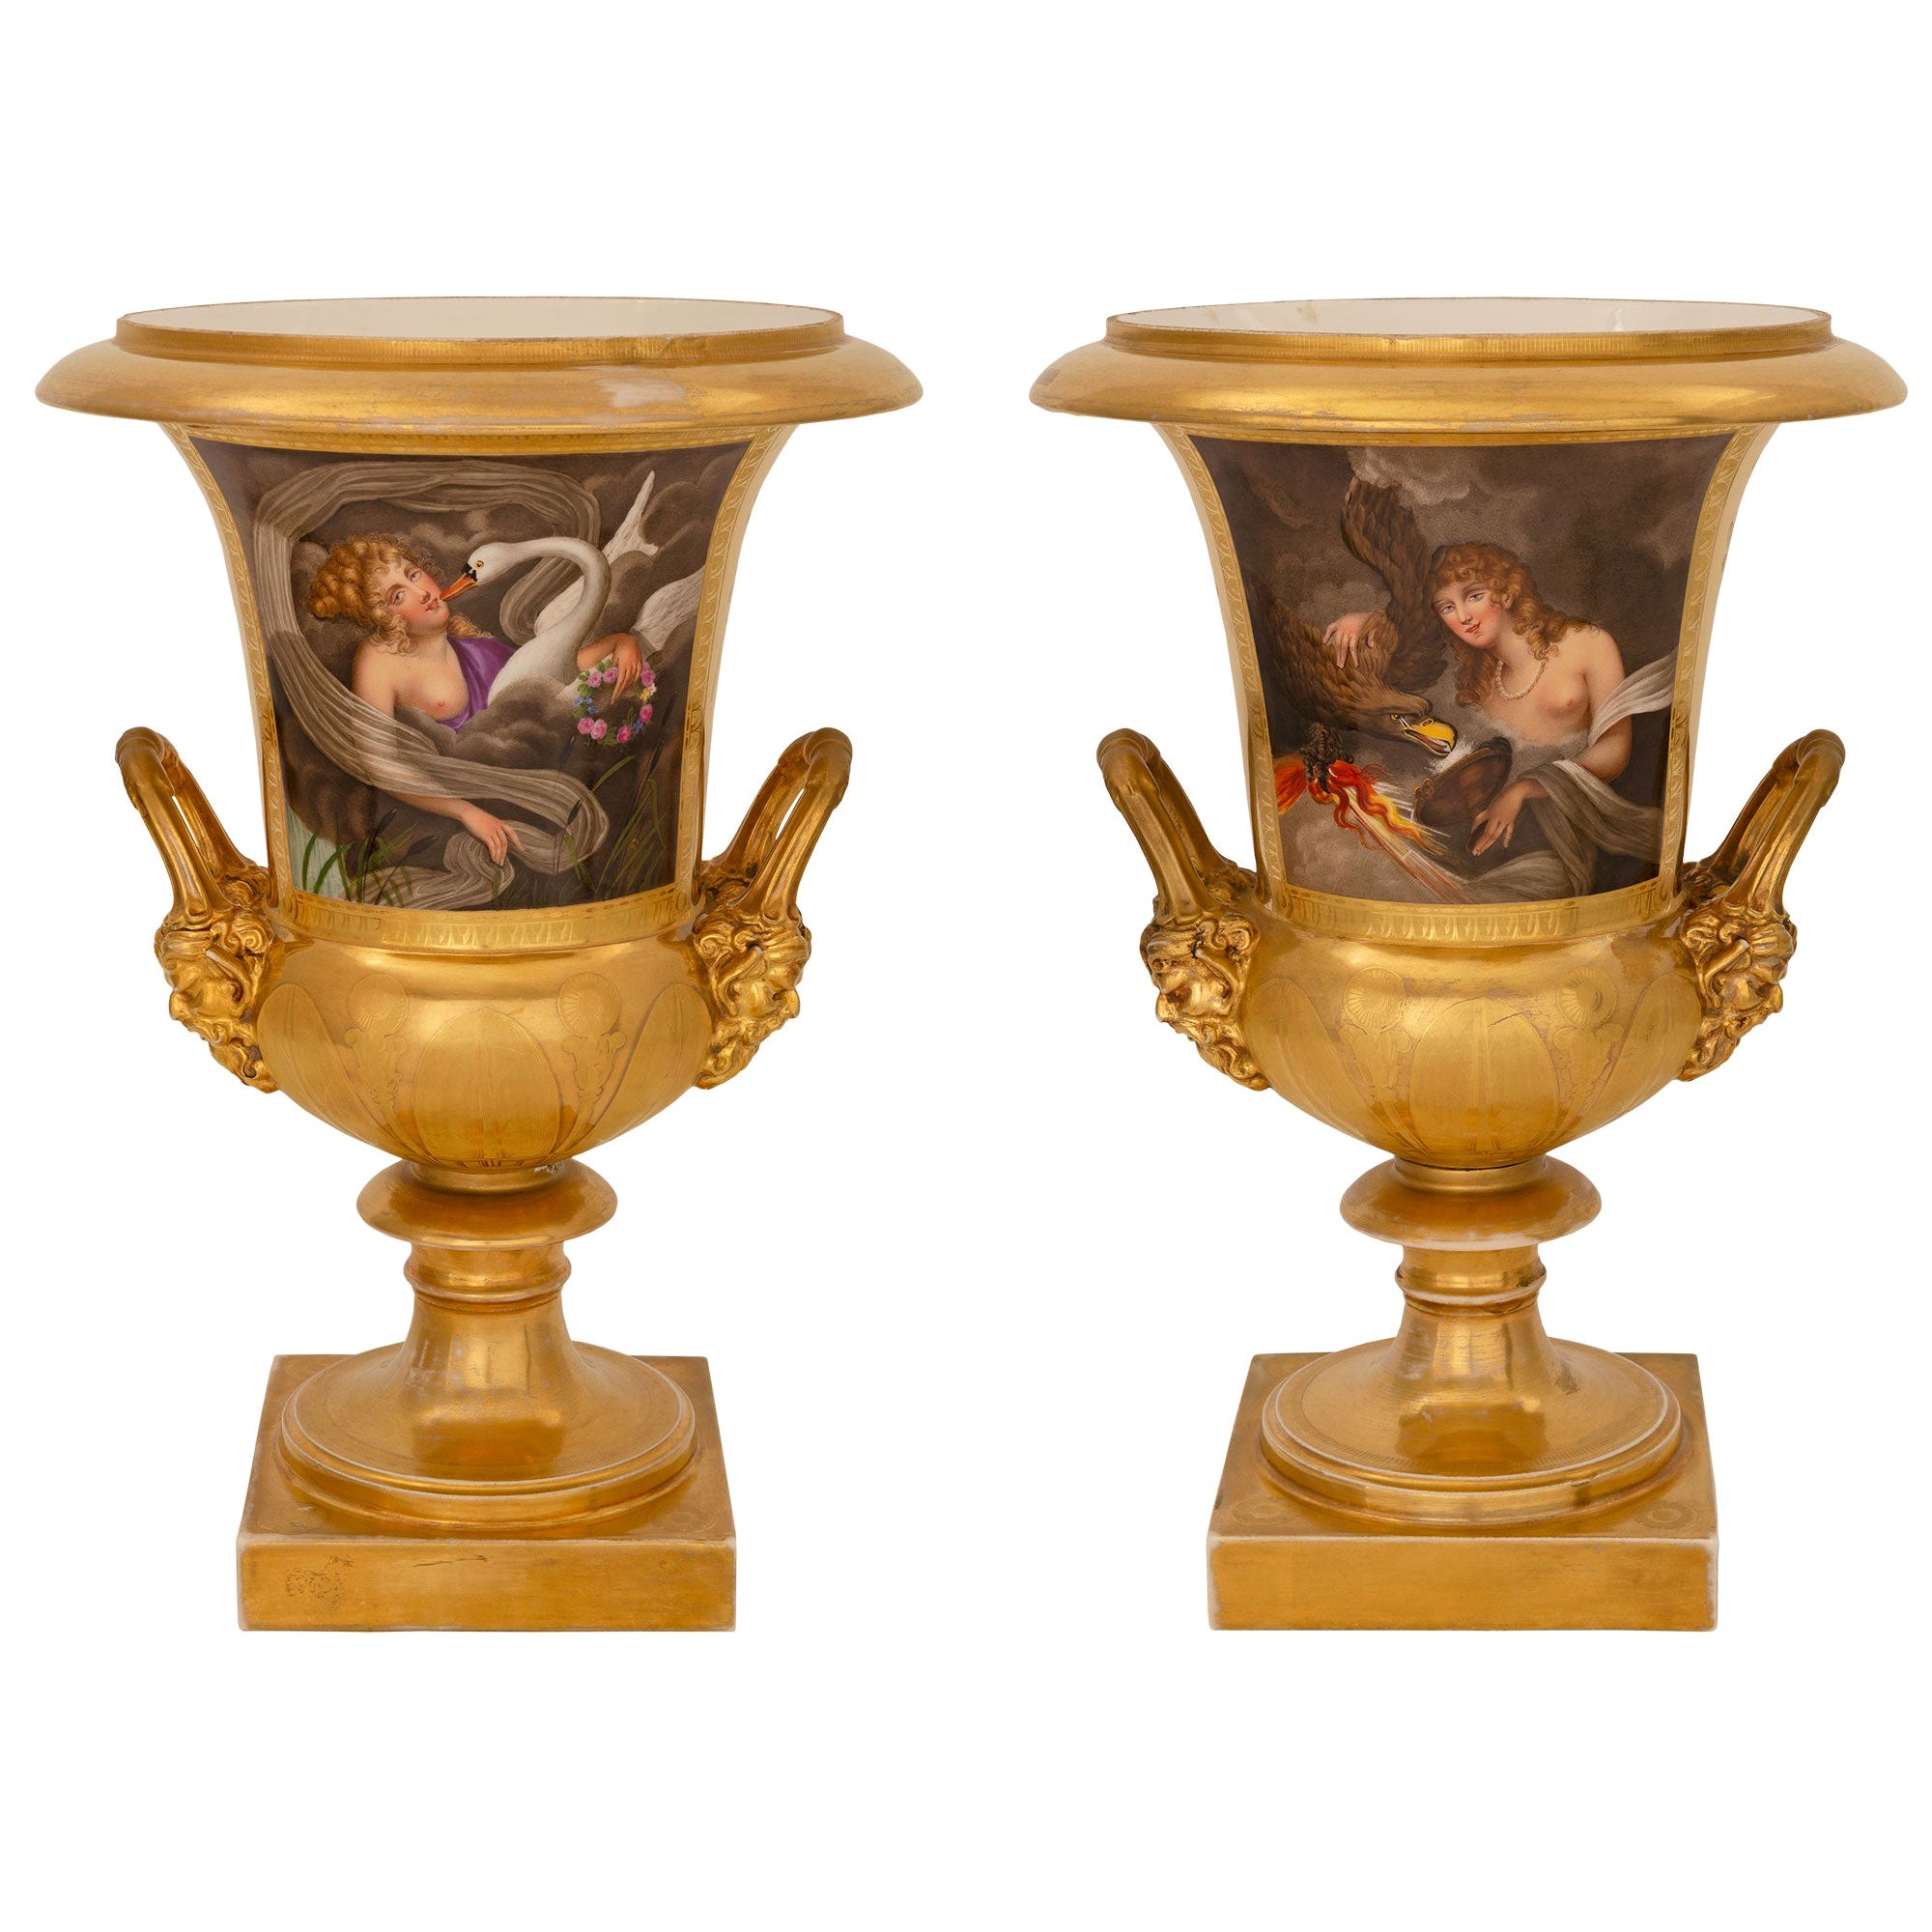 Pair of French 19th Century Neoclassical Style Porcelain De Paris Urns